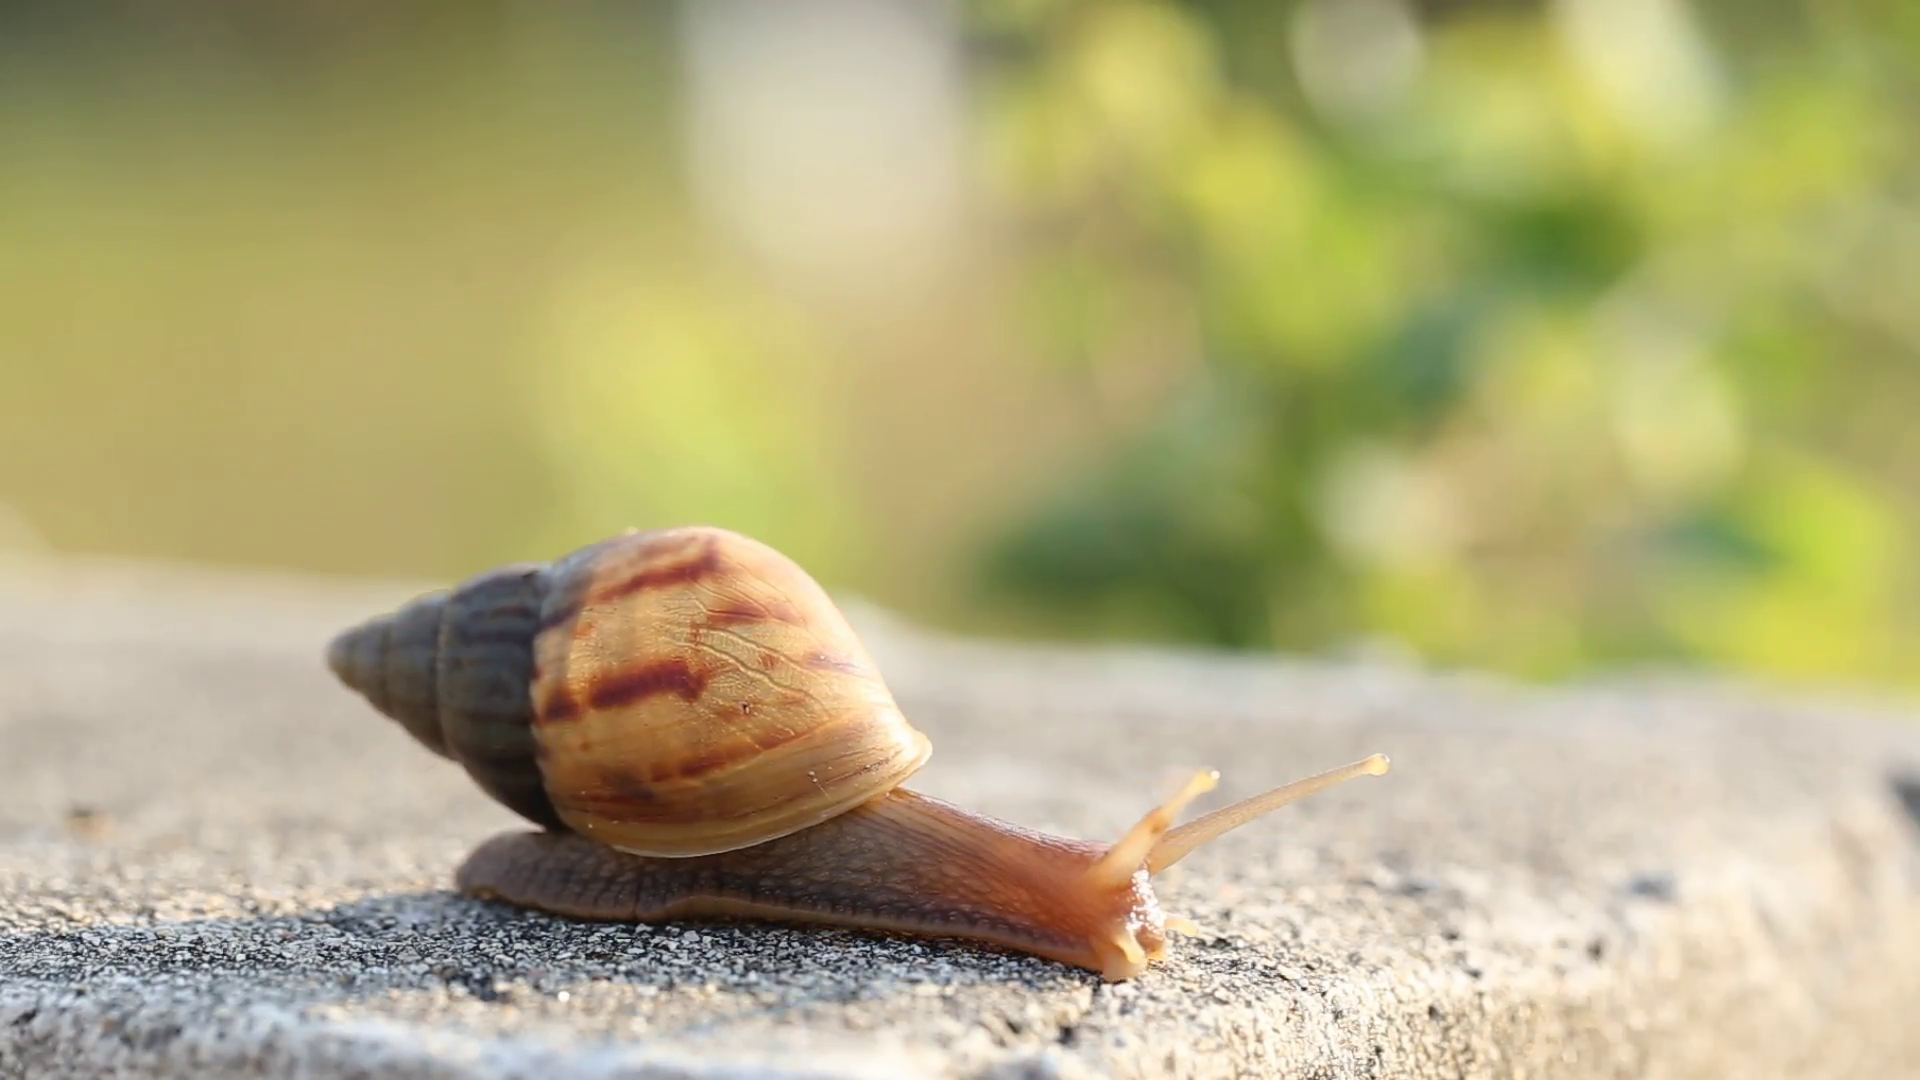 Beautiful Snail With Mucus In Nature Stock Video Footage - VideoBlocks